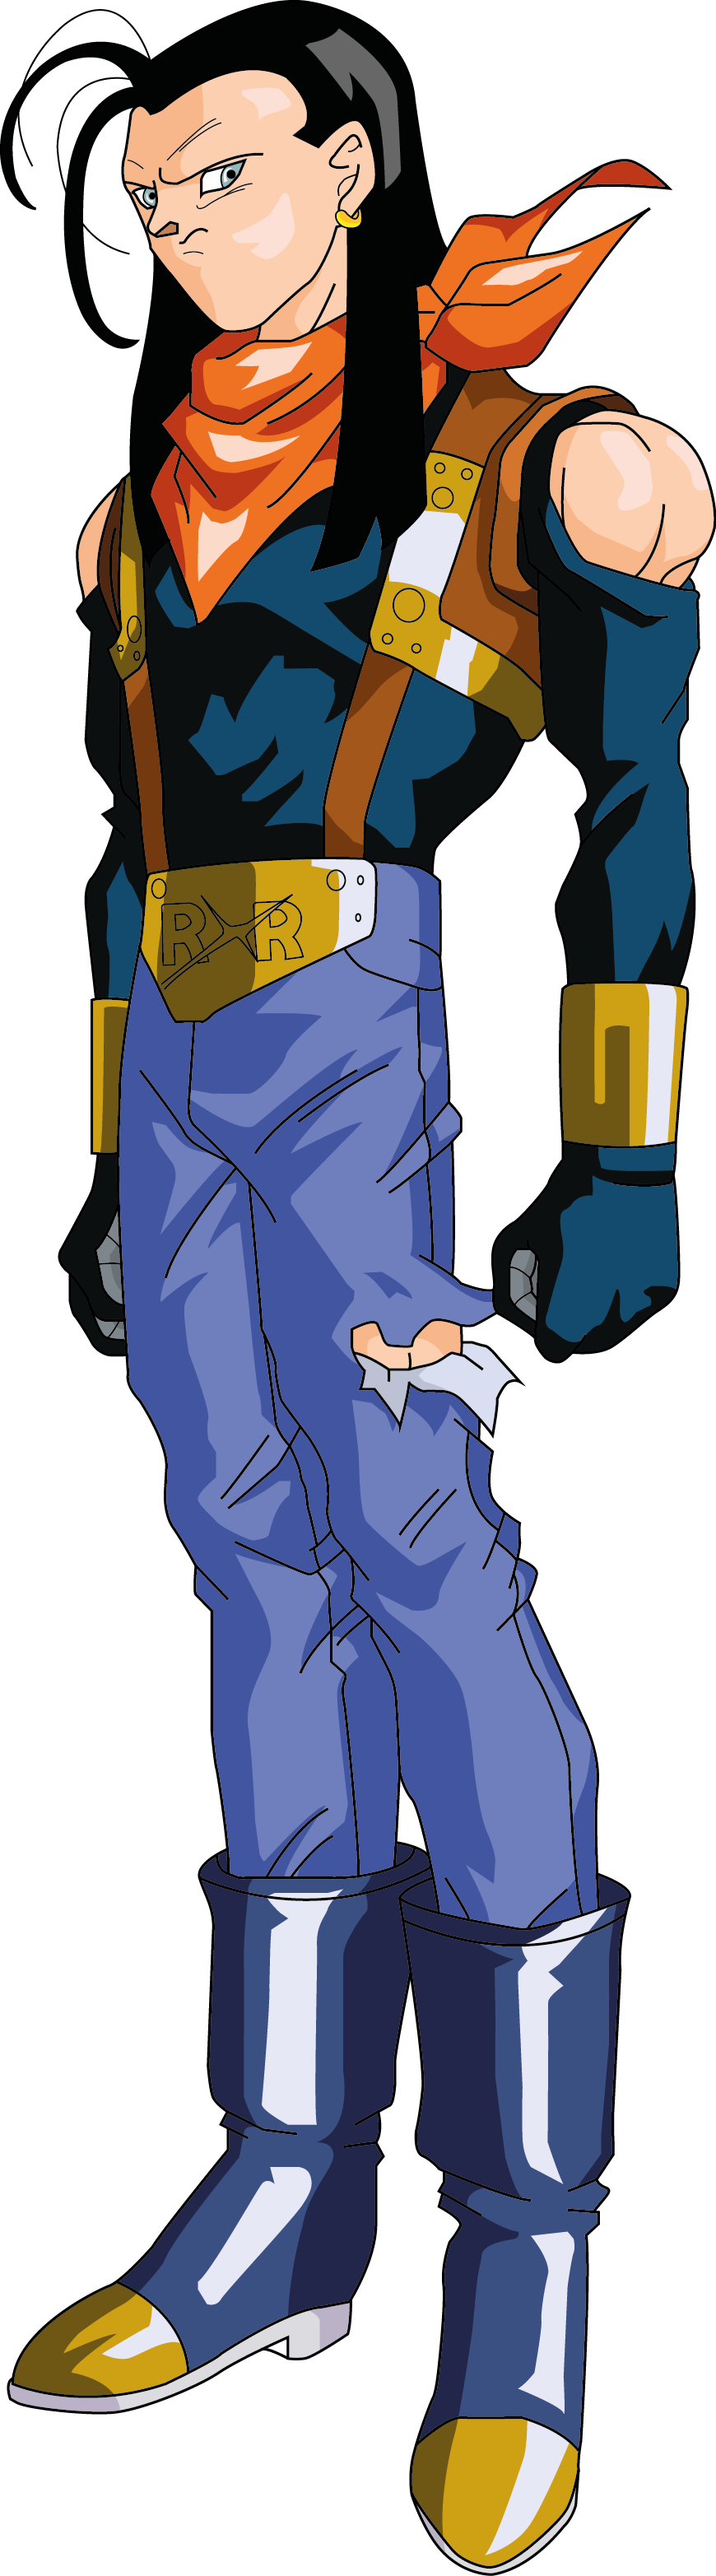 Dragon Ball GT - Super A17 by DBCProject on DeviantArt